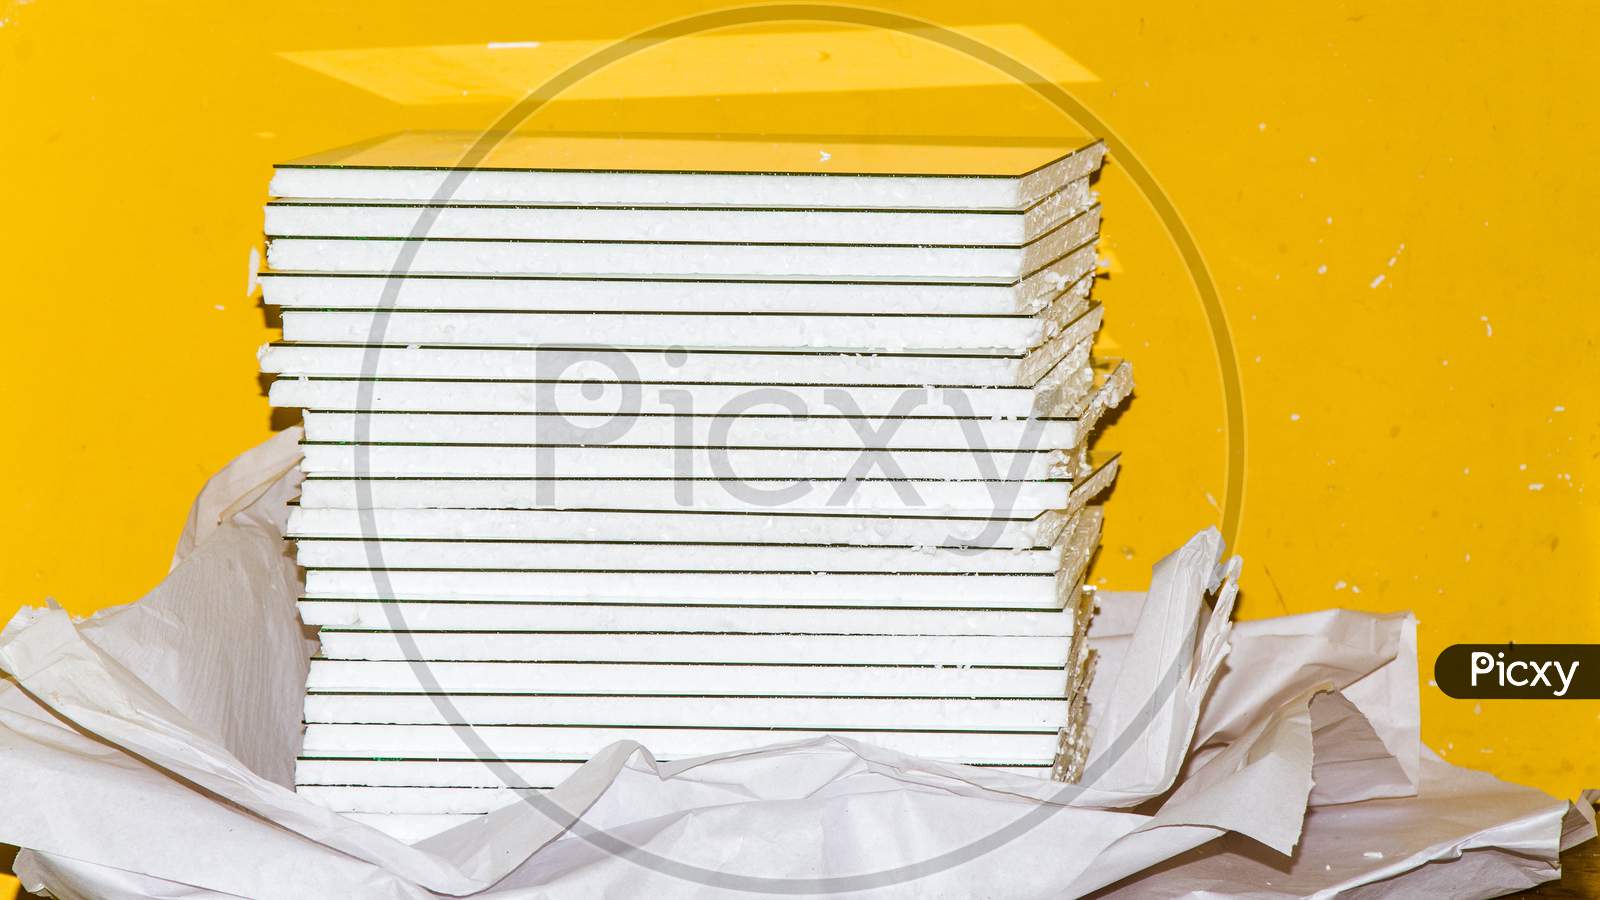 Raw material of wall scenery, selective focus, yellow background.